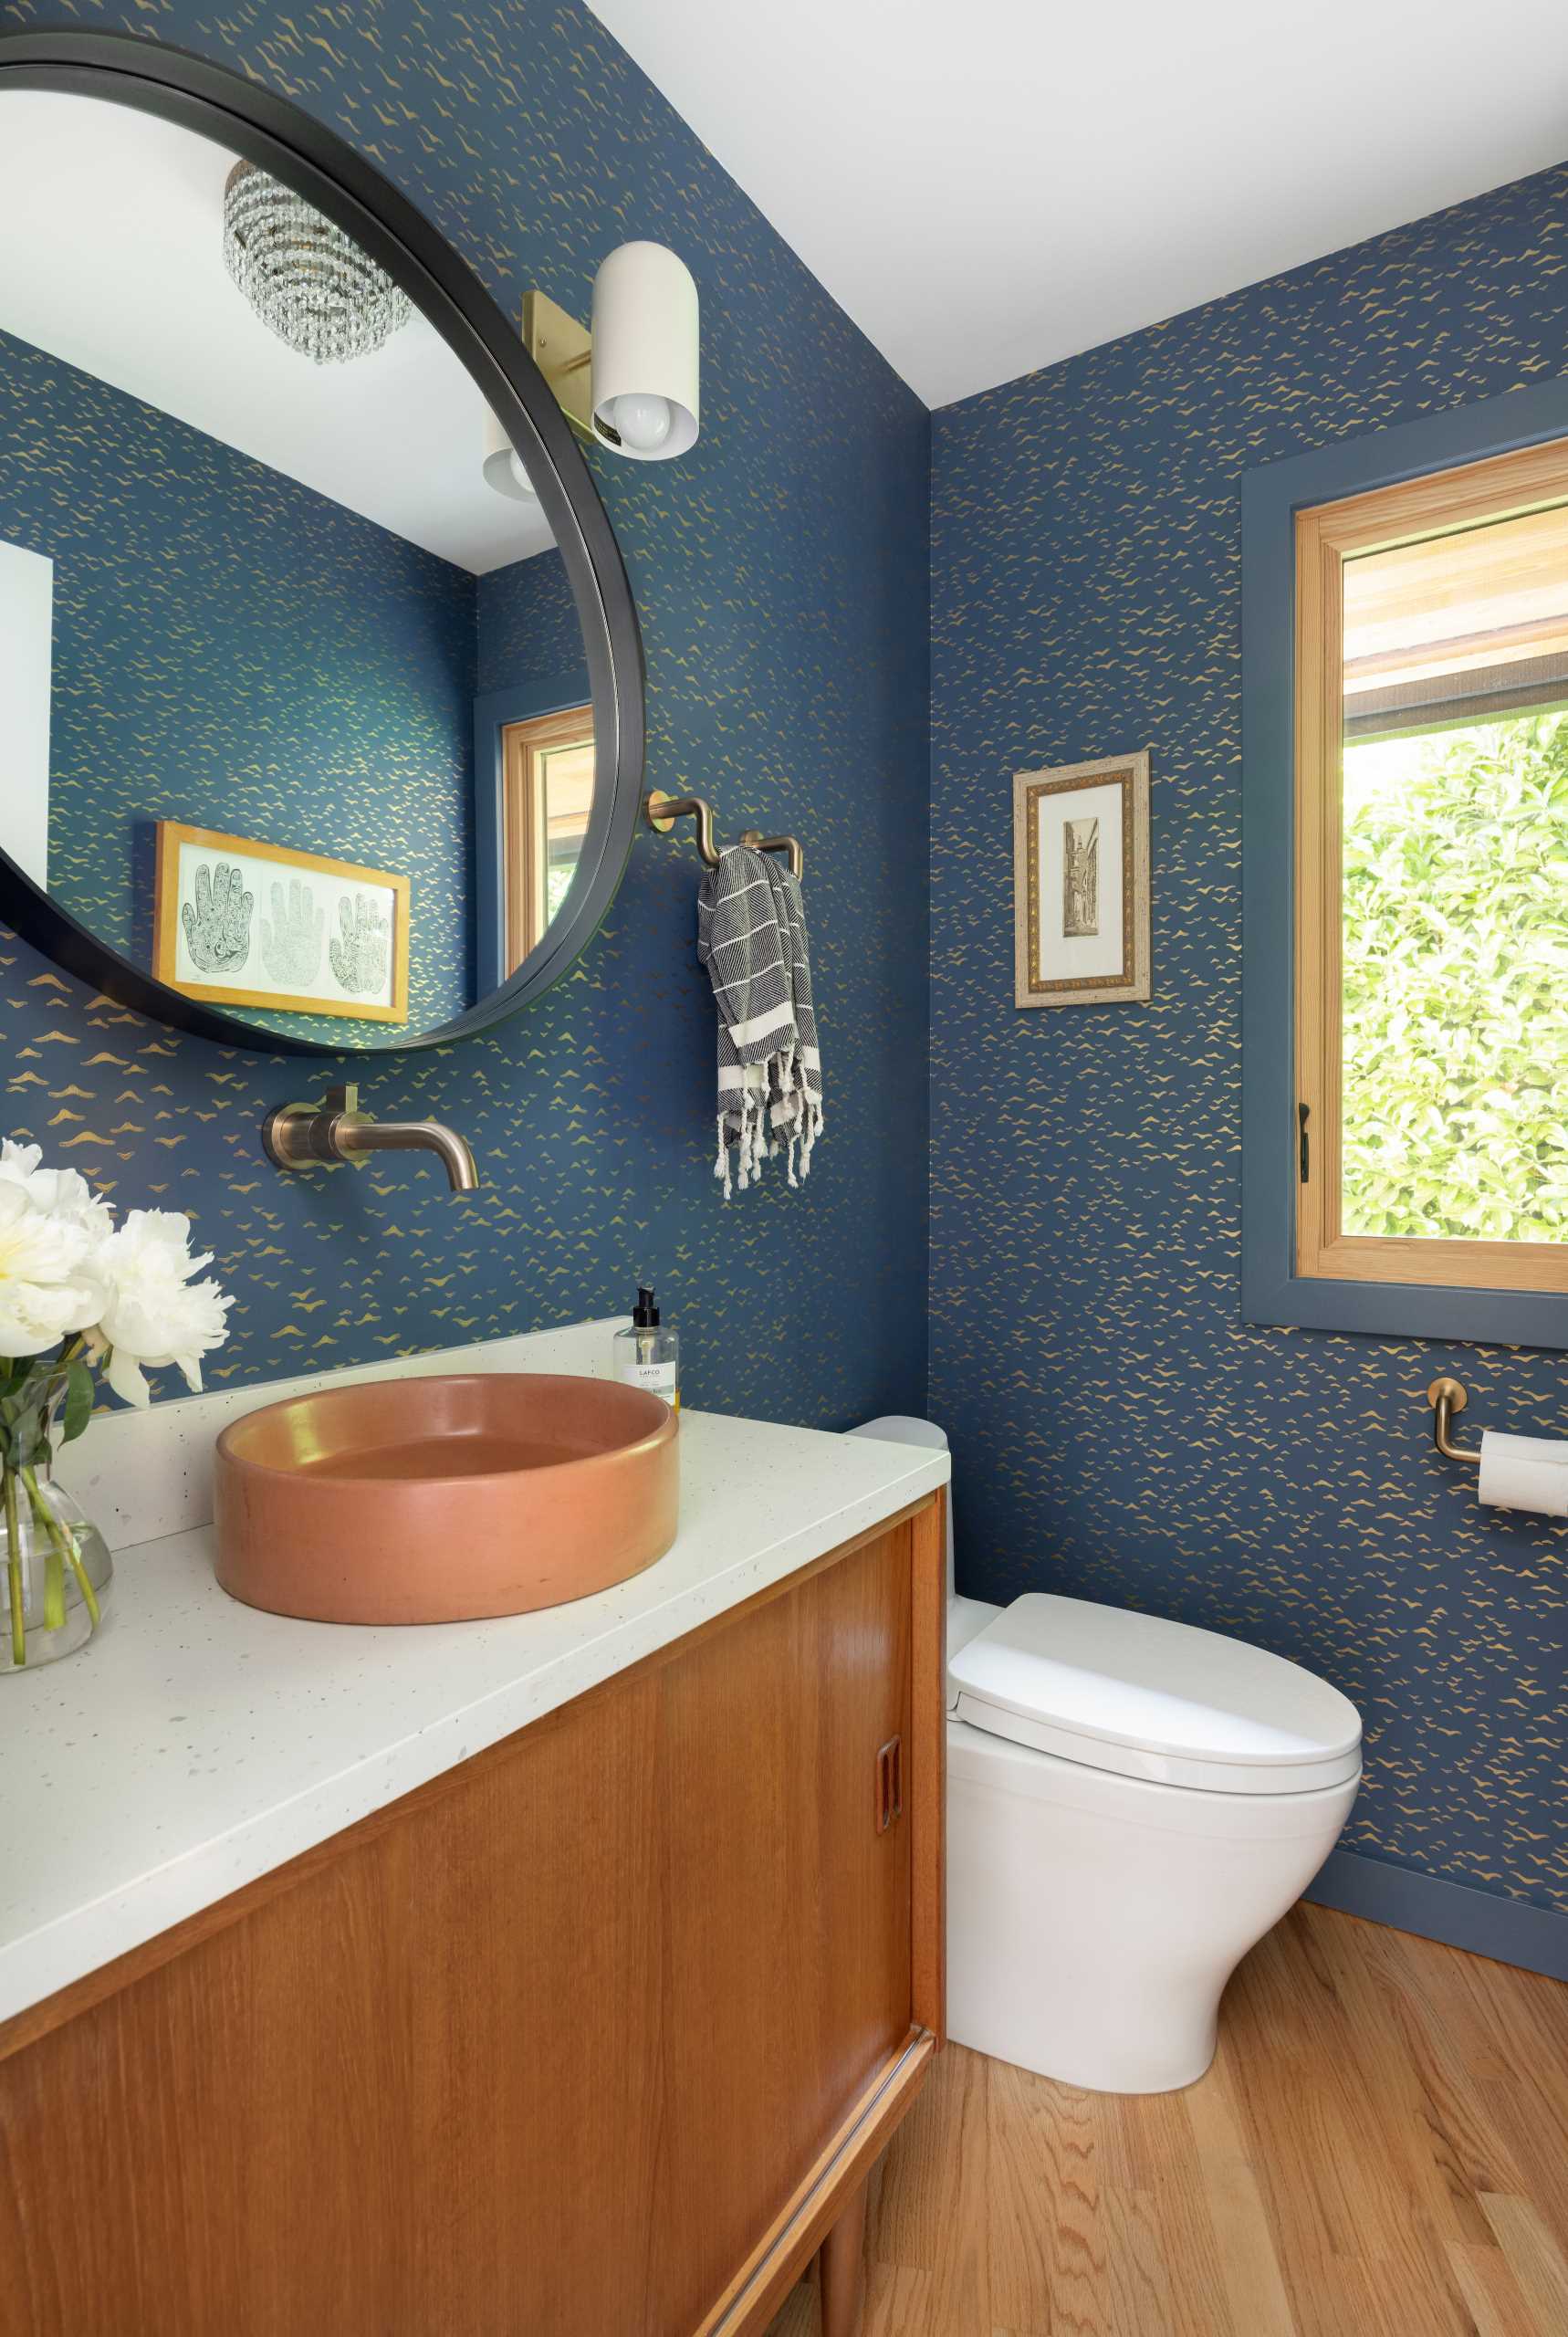 The updated powder room includes wallpapered walls with delicate metallic accents.